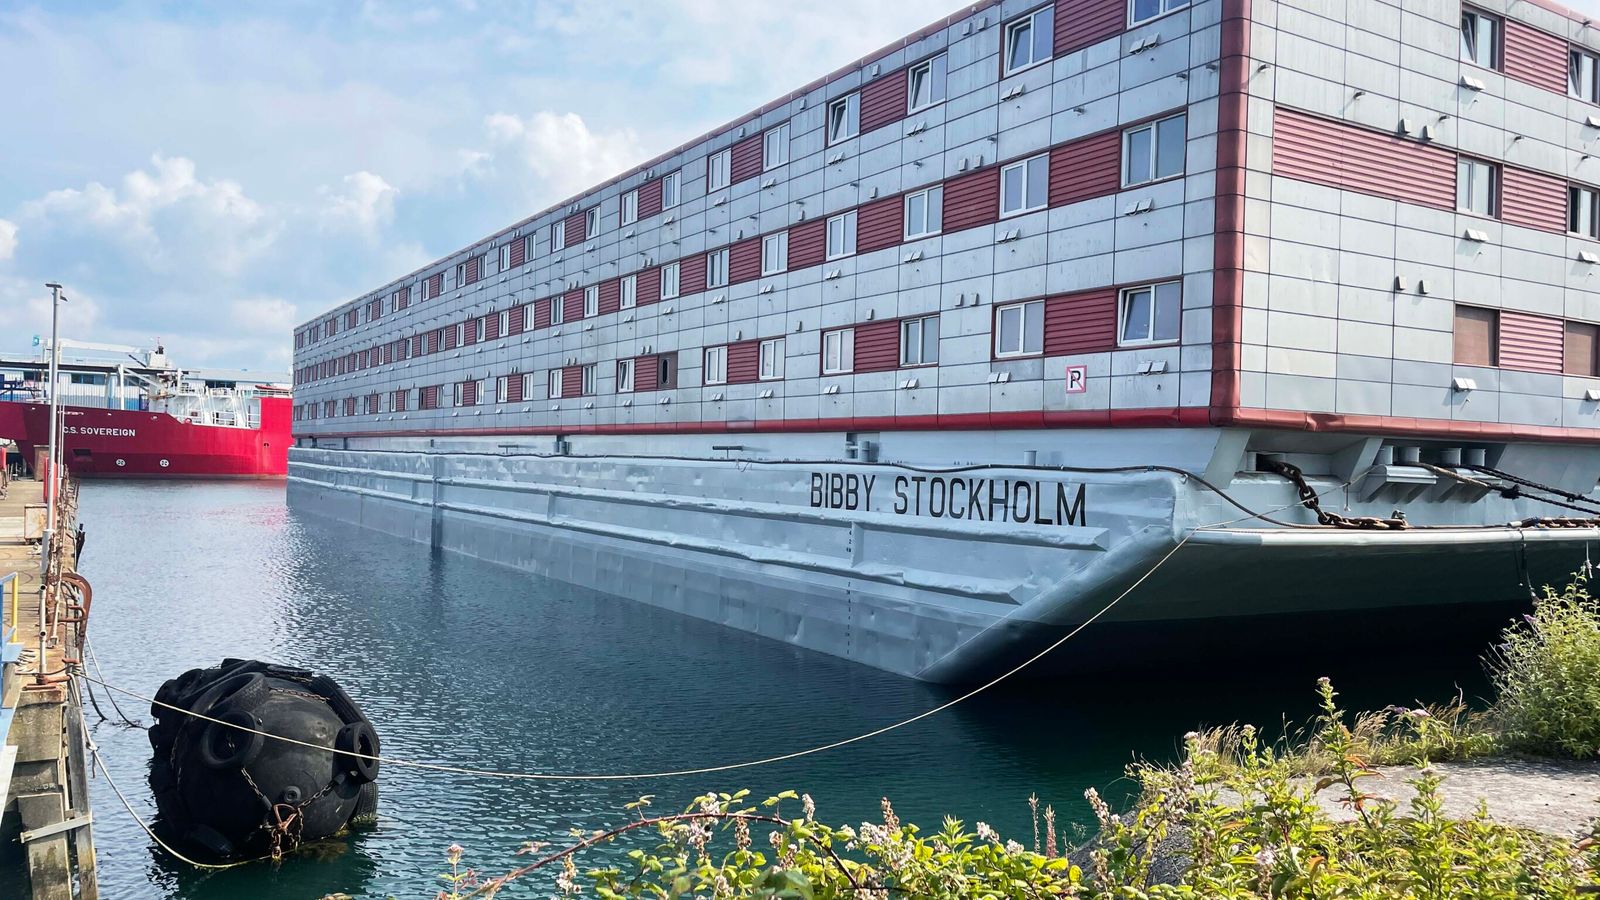 Bibby Stockholm: Asylum seekers may be housed on barge from today - as government unveils new migration policy